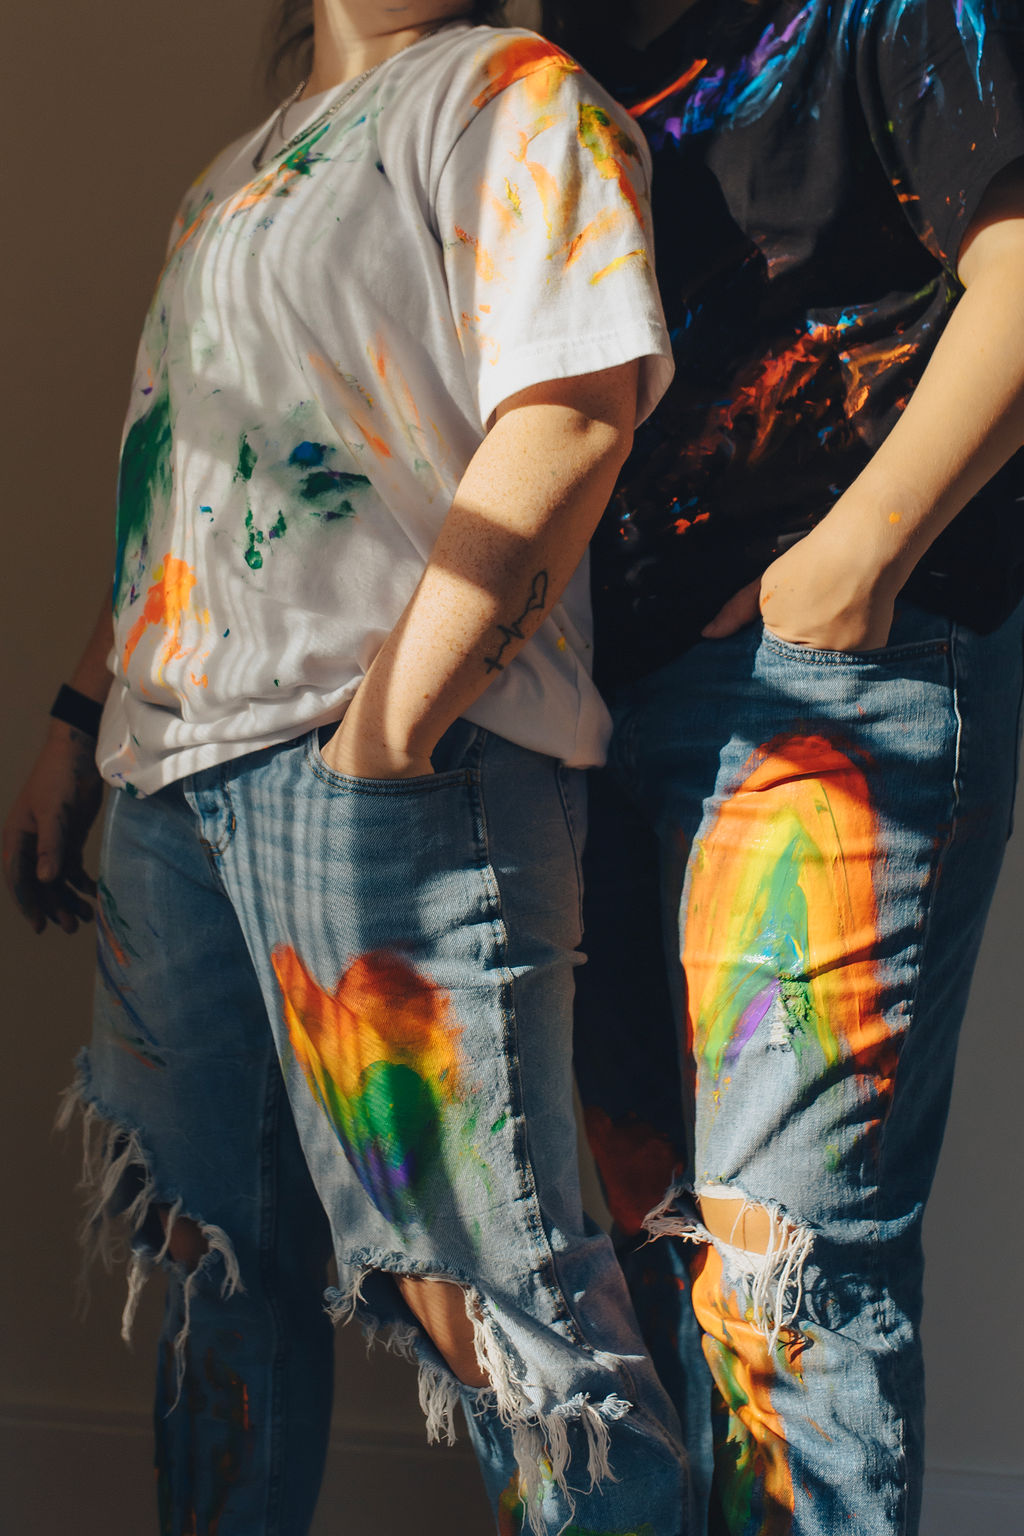 Brand photography for Inkpot Creative, of two people standing next to each other covered in paint.